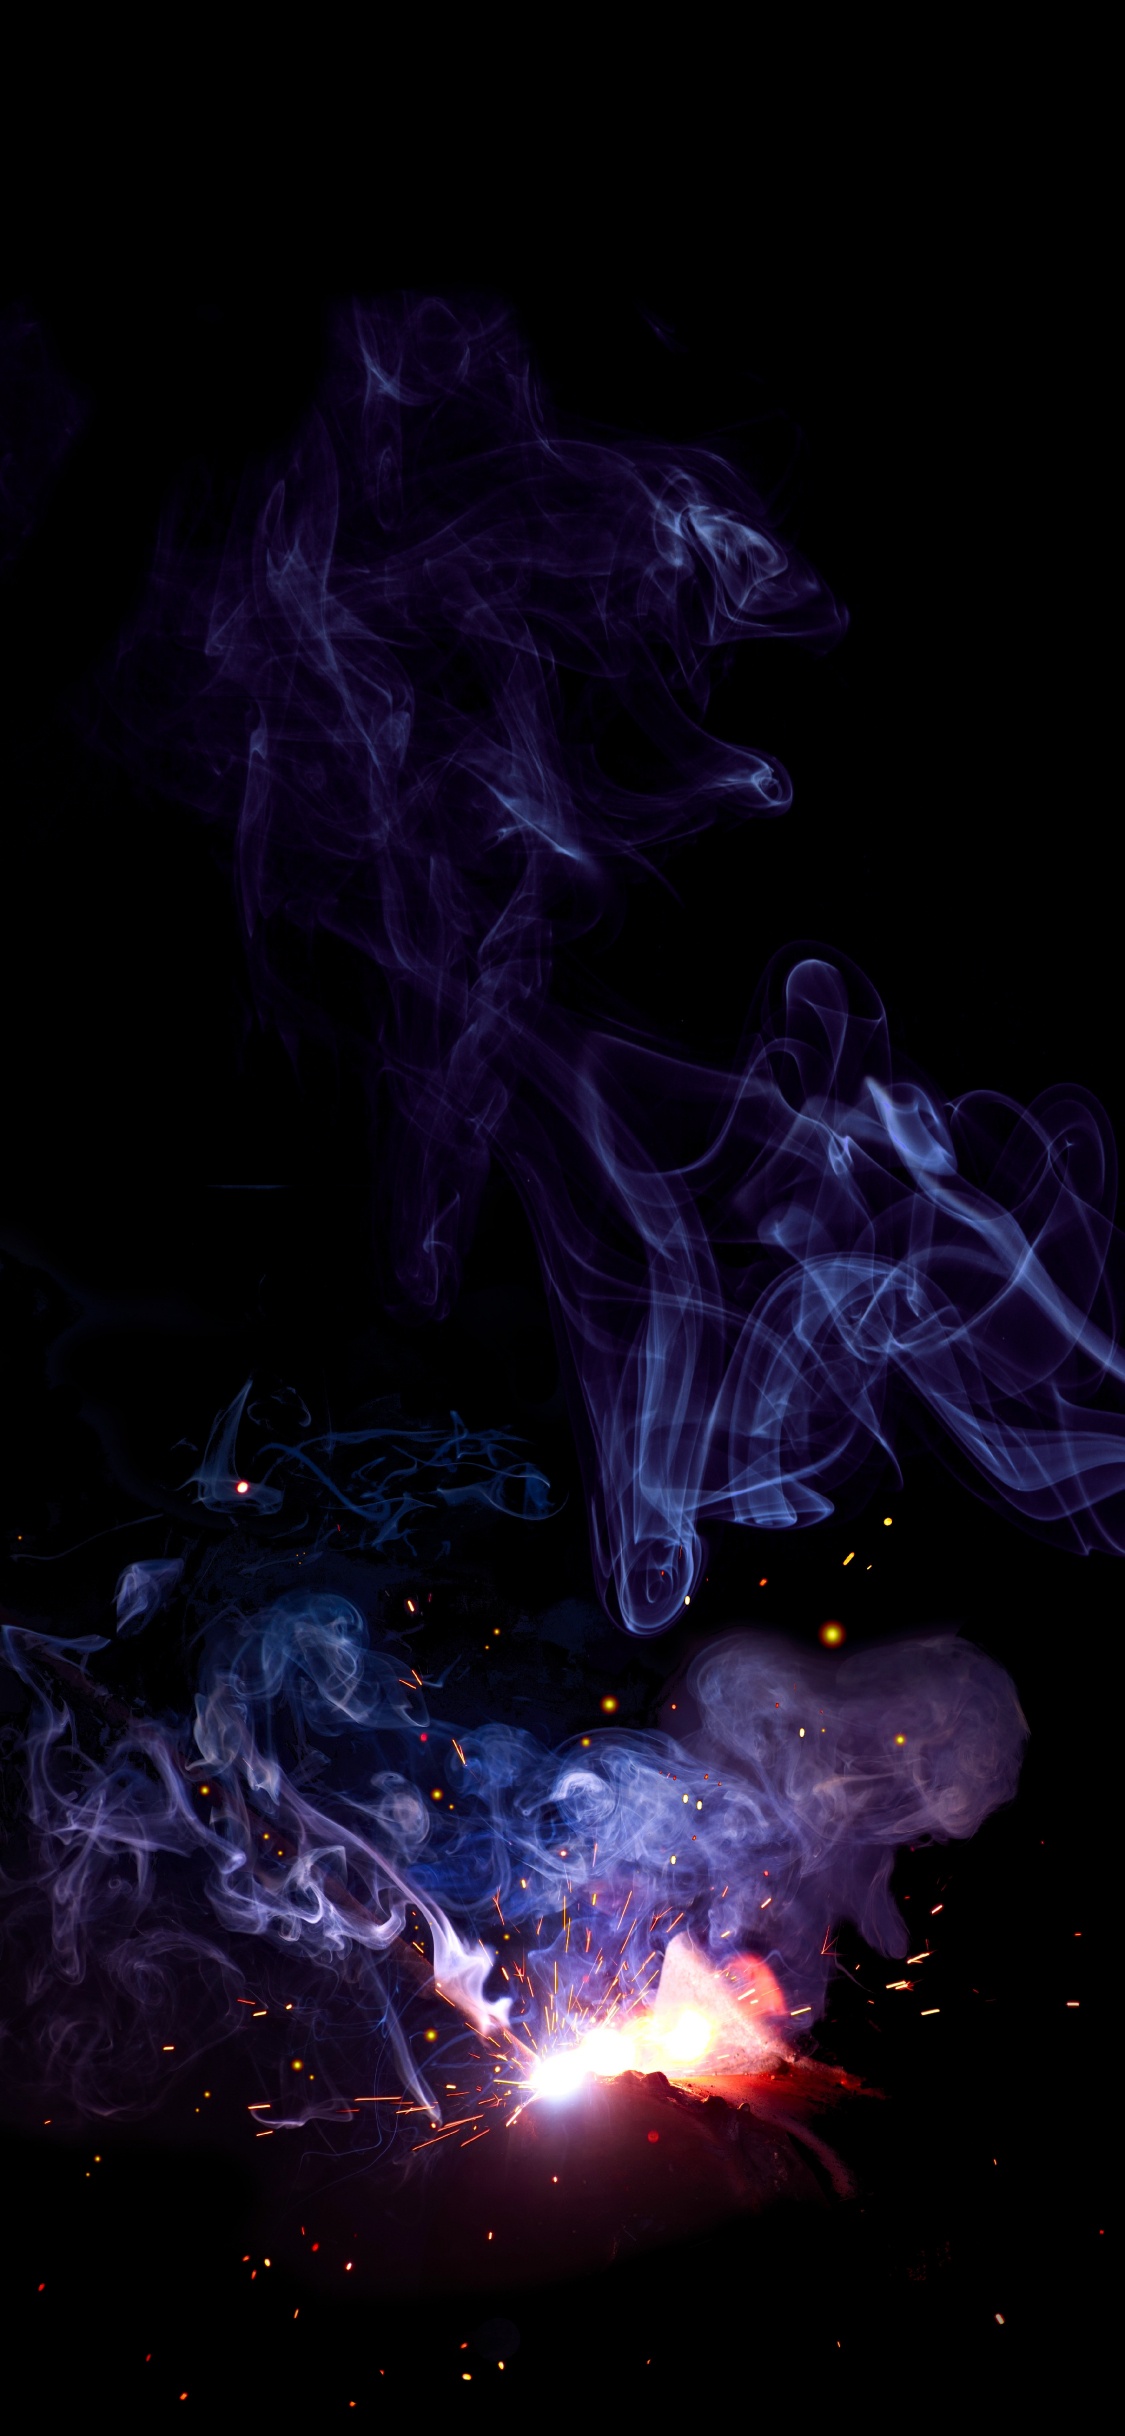 Blue and White Smoke Illustration. Wallpaper in 1125x2436 Resolution